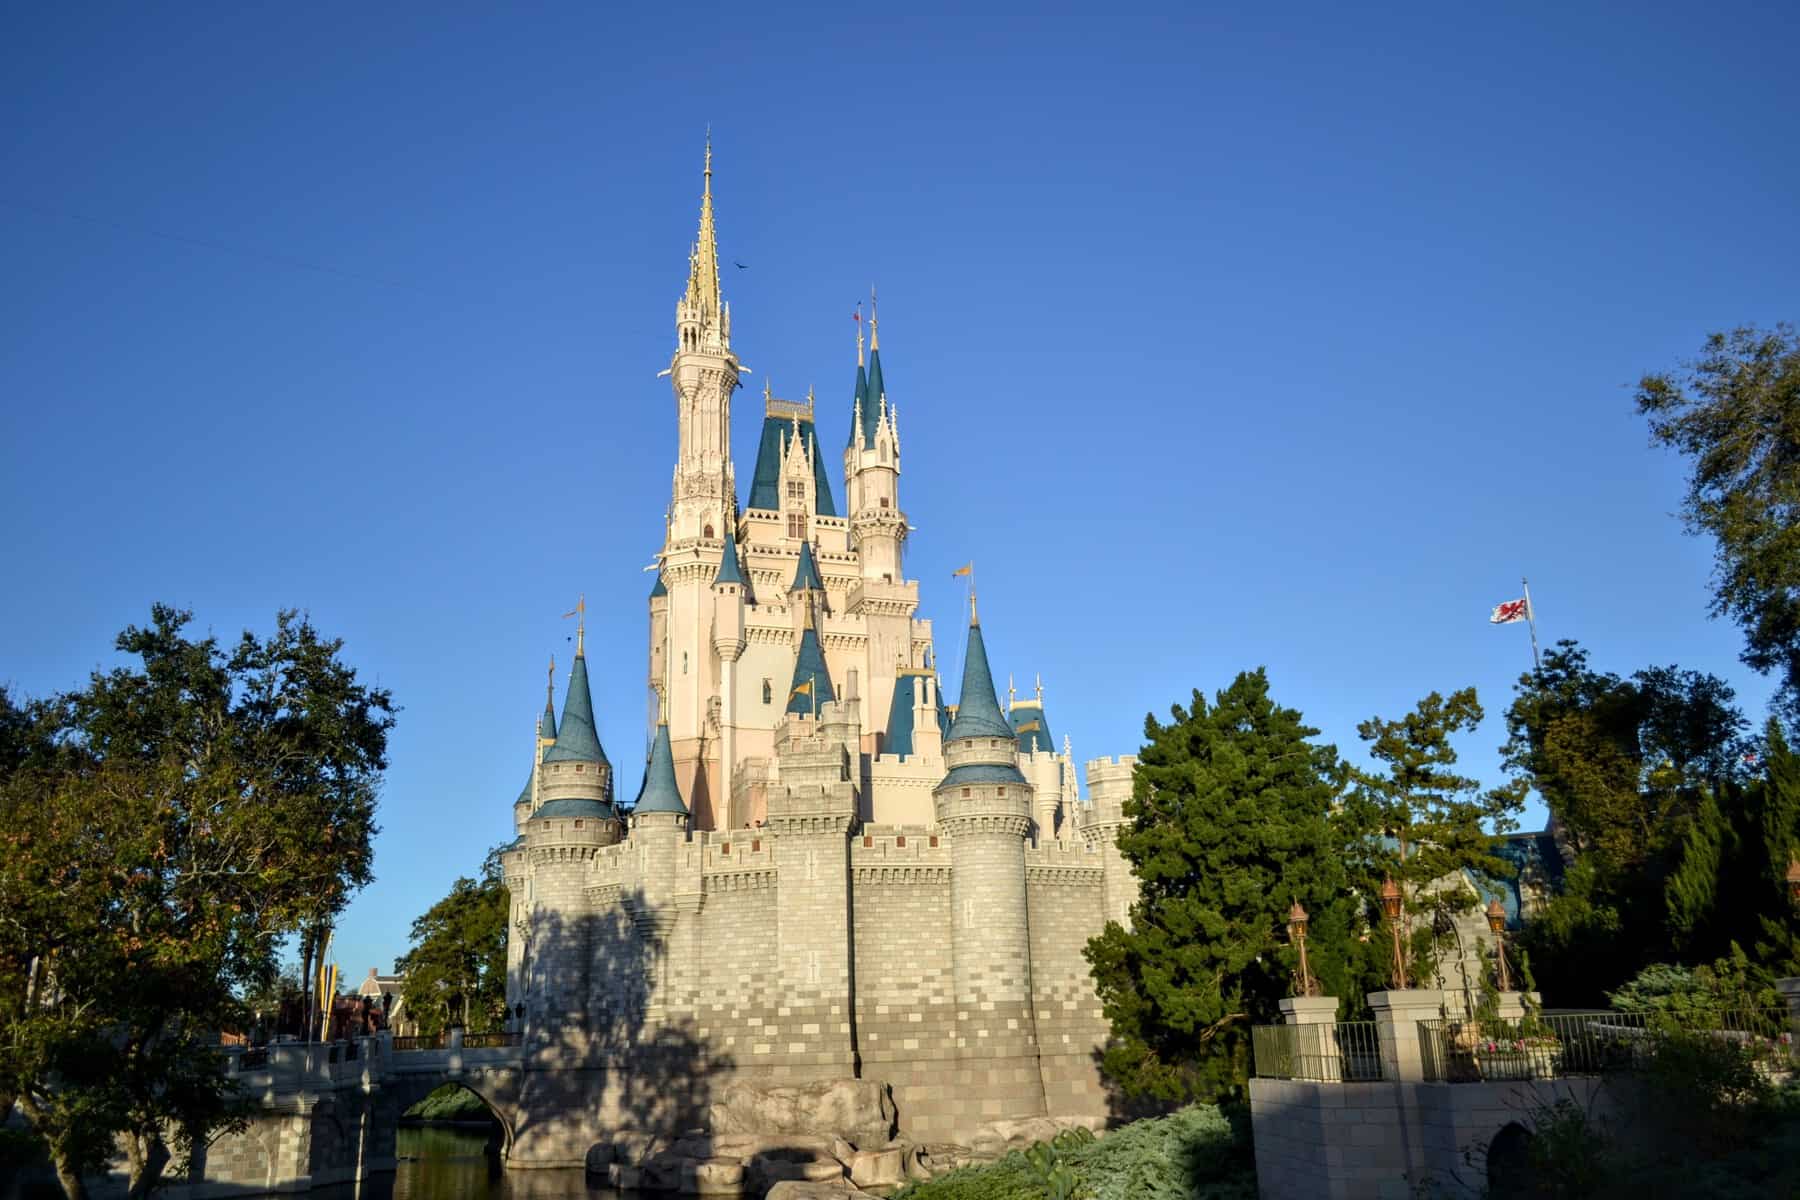 Infographic: How to Plan a Trip to Disney World